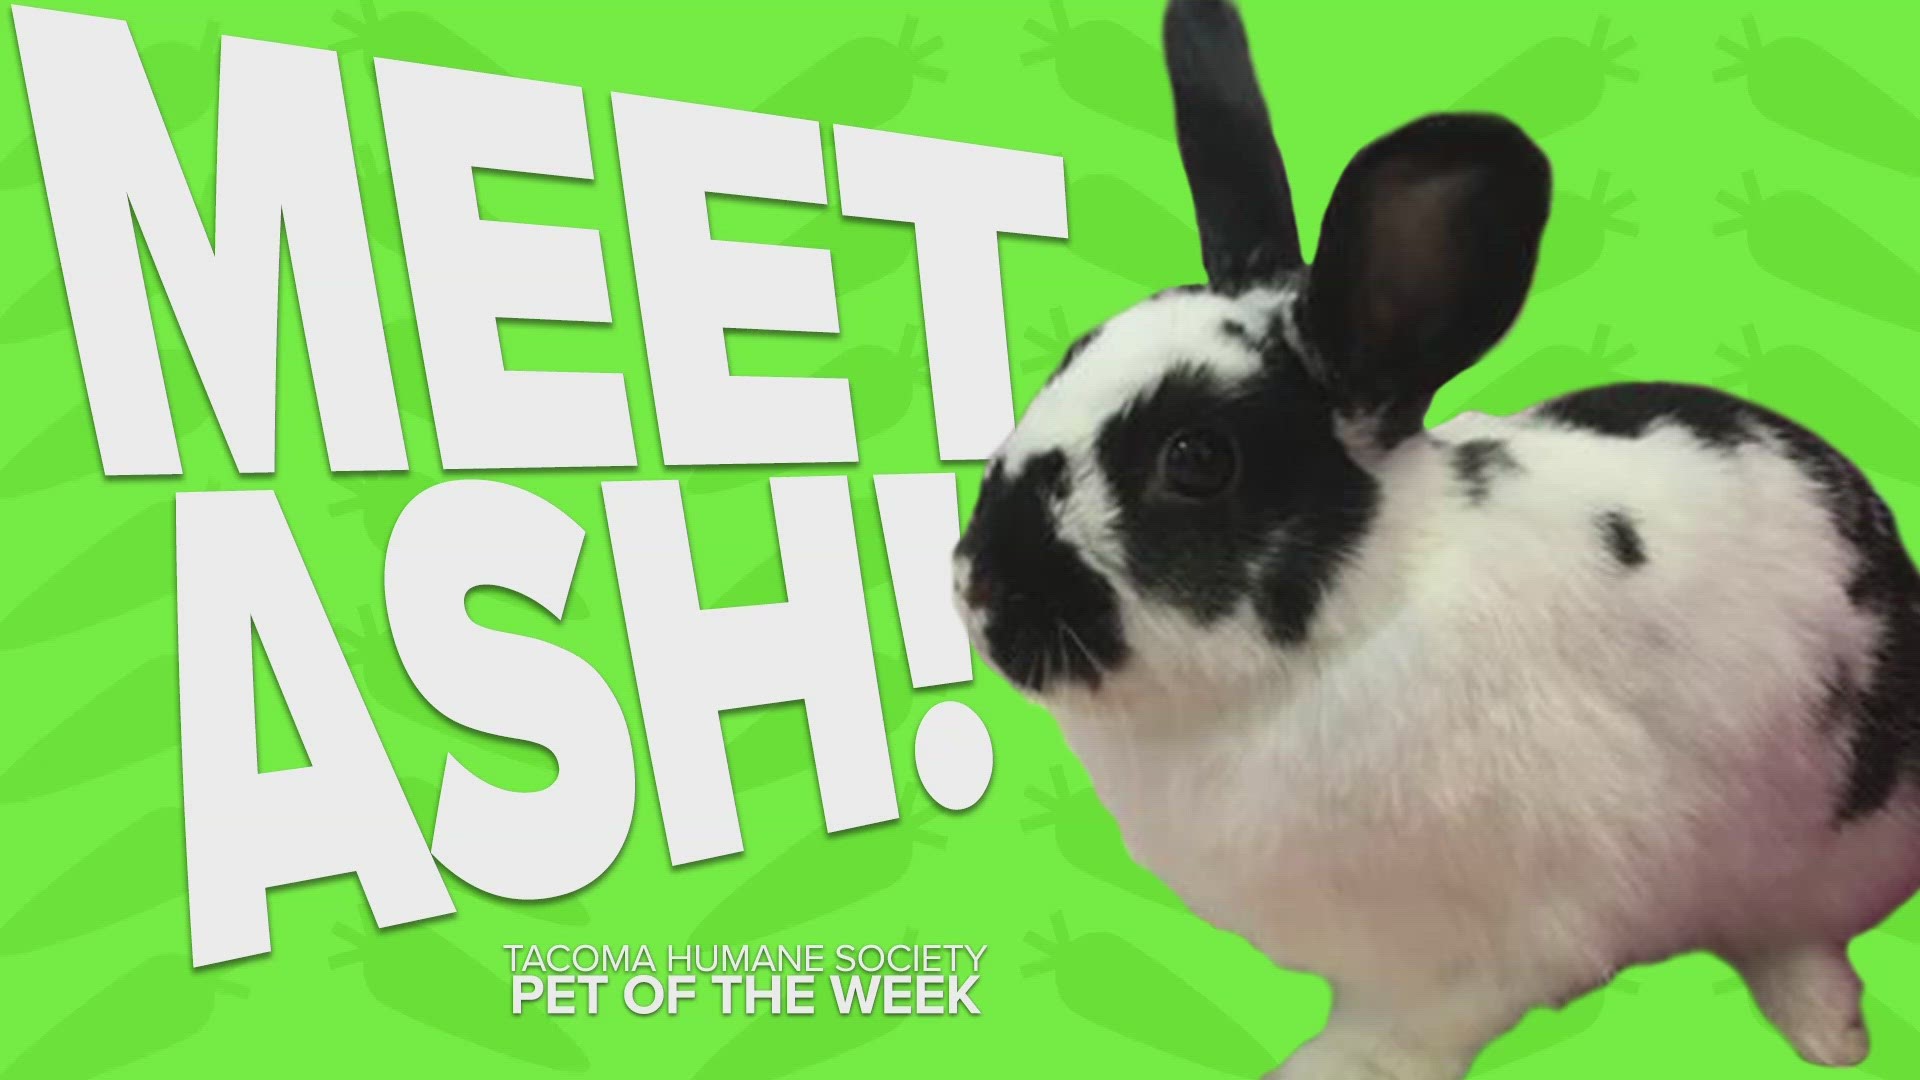 This week's featured pet rescue of the week is our first rabbit, Ash!